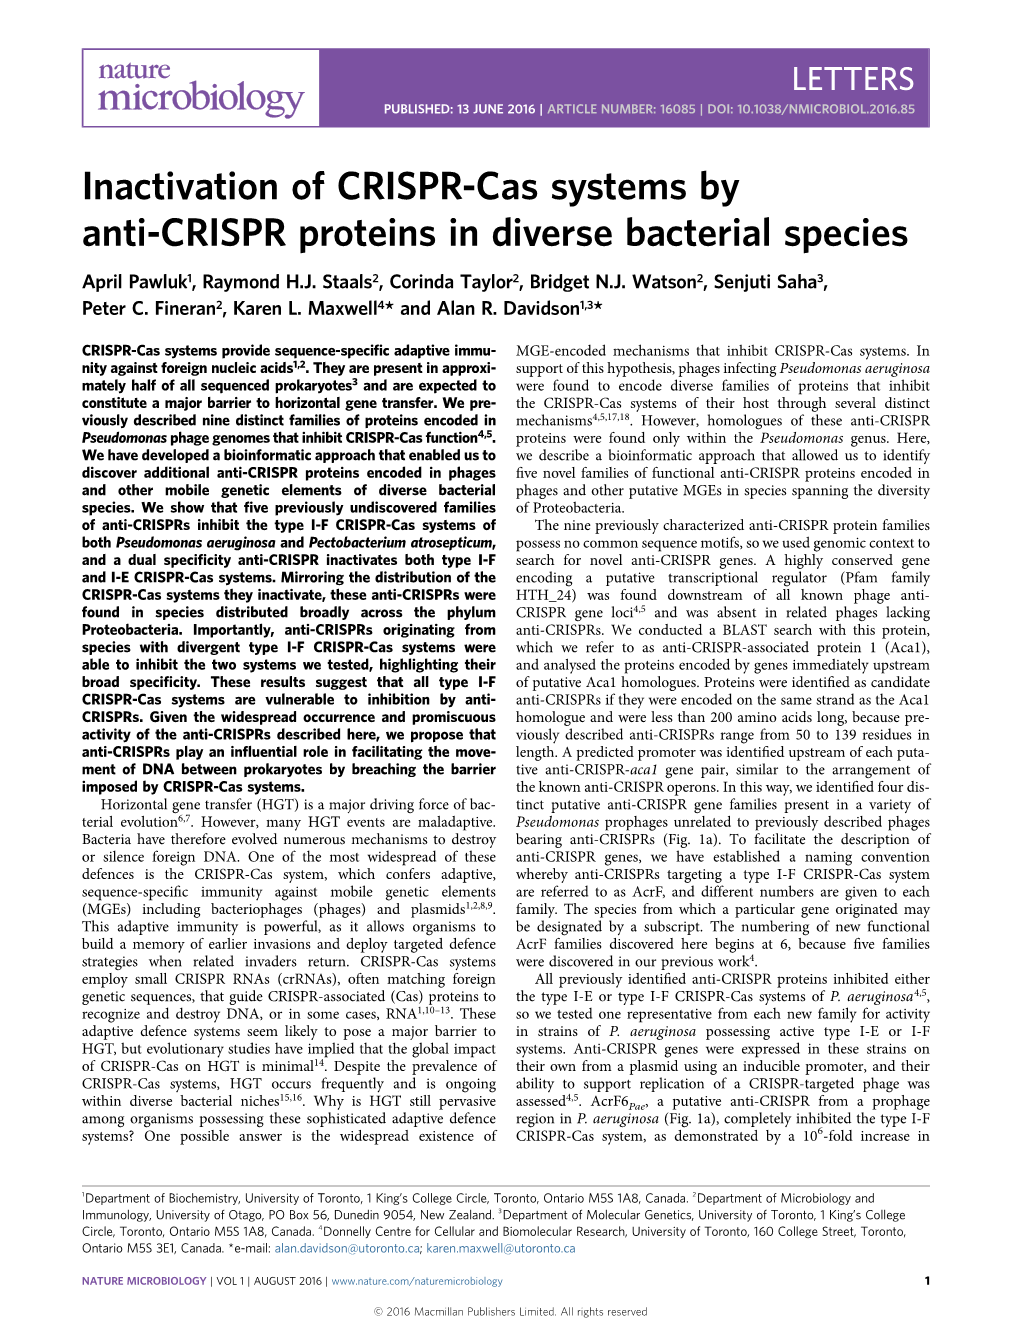 Inactivation of CRISPR-Cas Systems by Anti-CRISPR Proteins in Diverse Bacterial Species April Pawluk1, Raymond H.J